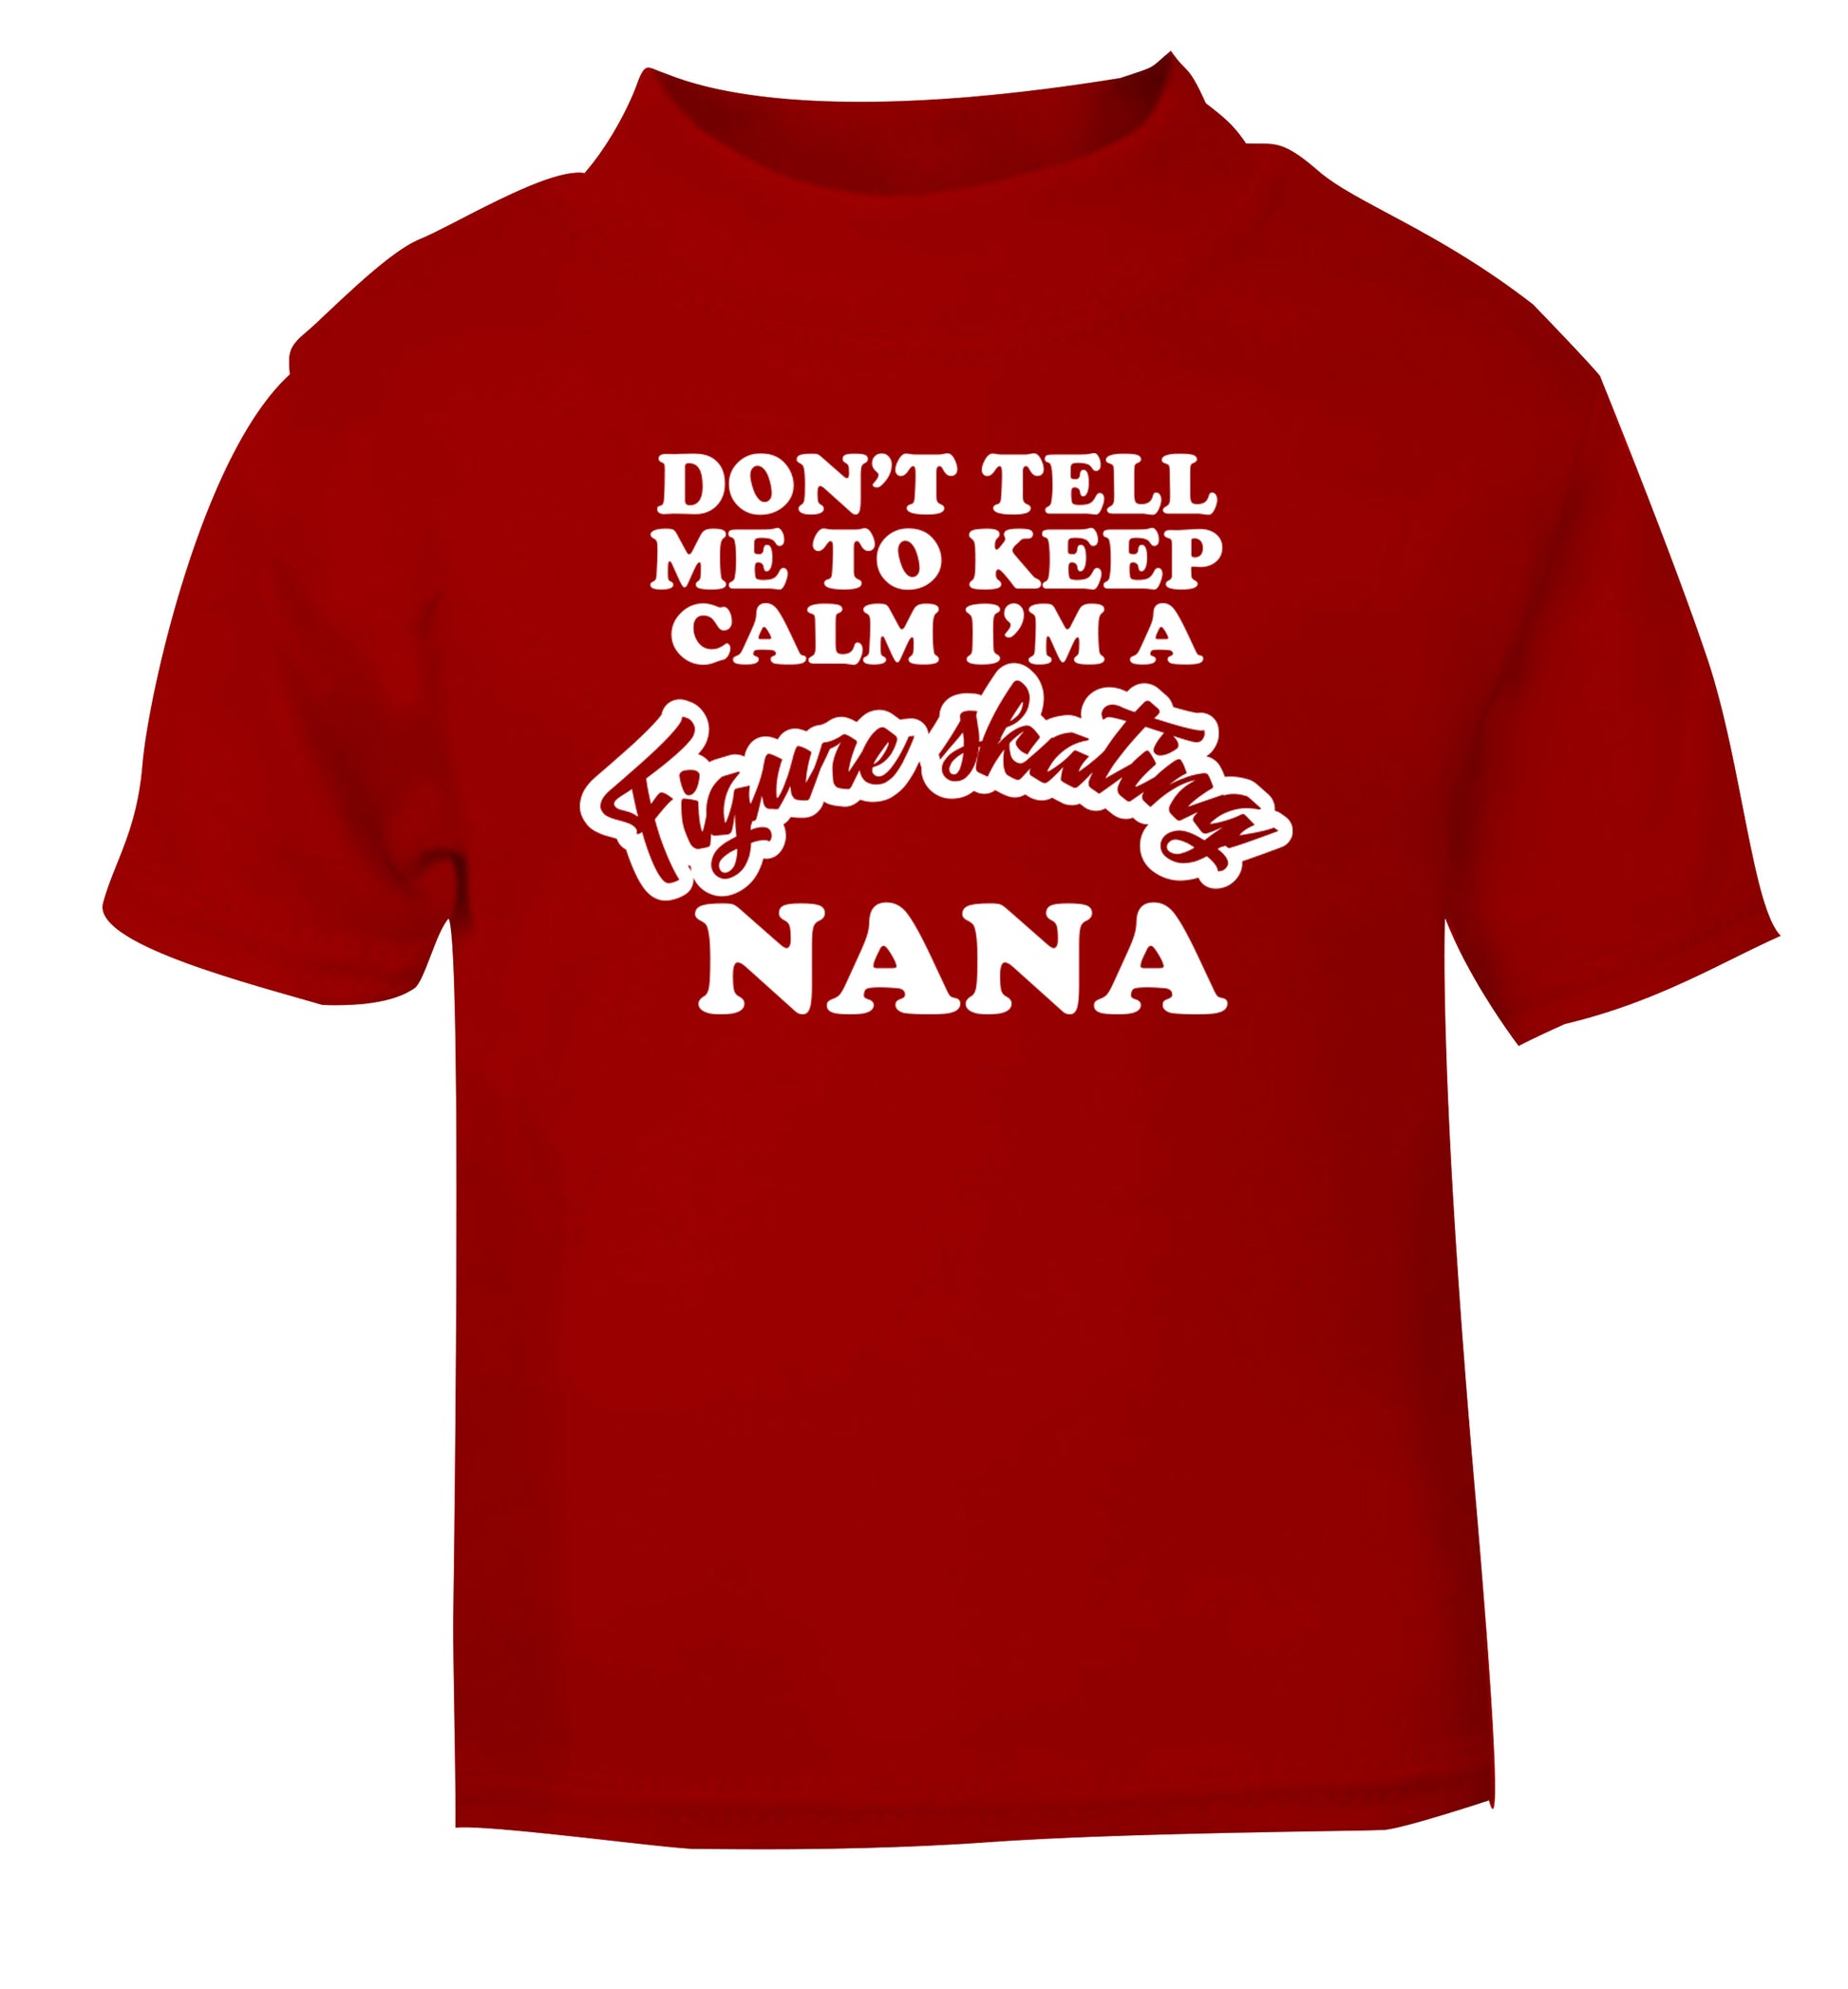 Don't tell me to keep calm I'm a figure skating nana red Baby Toddler Tshirt 2 Years